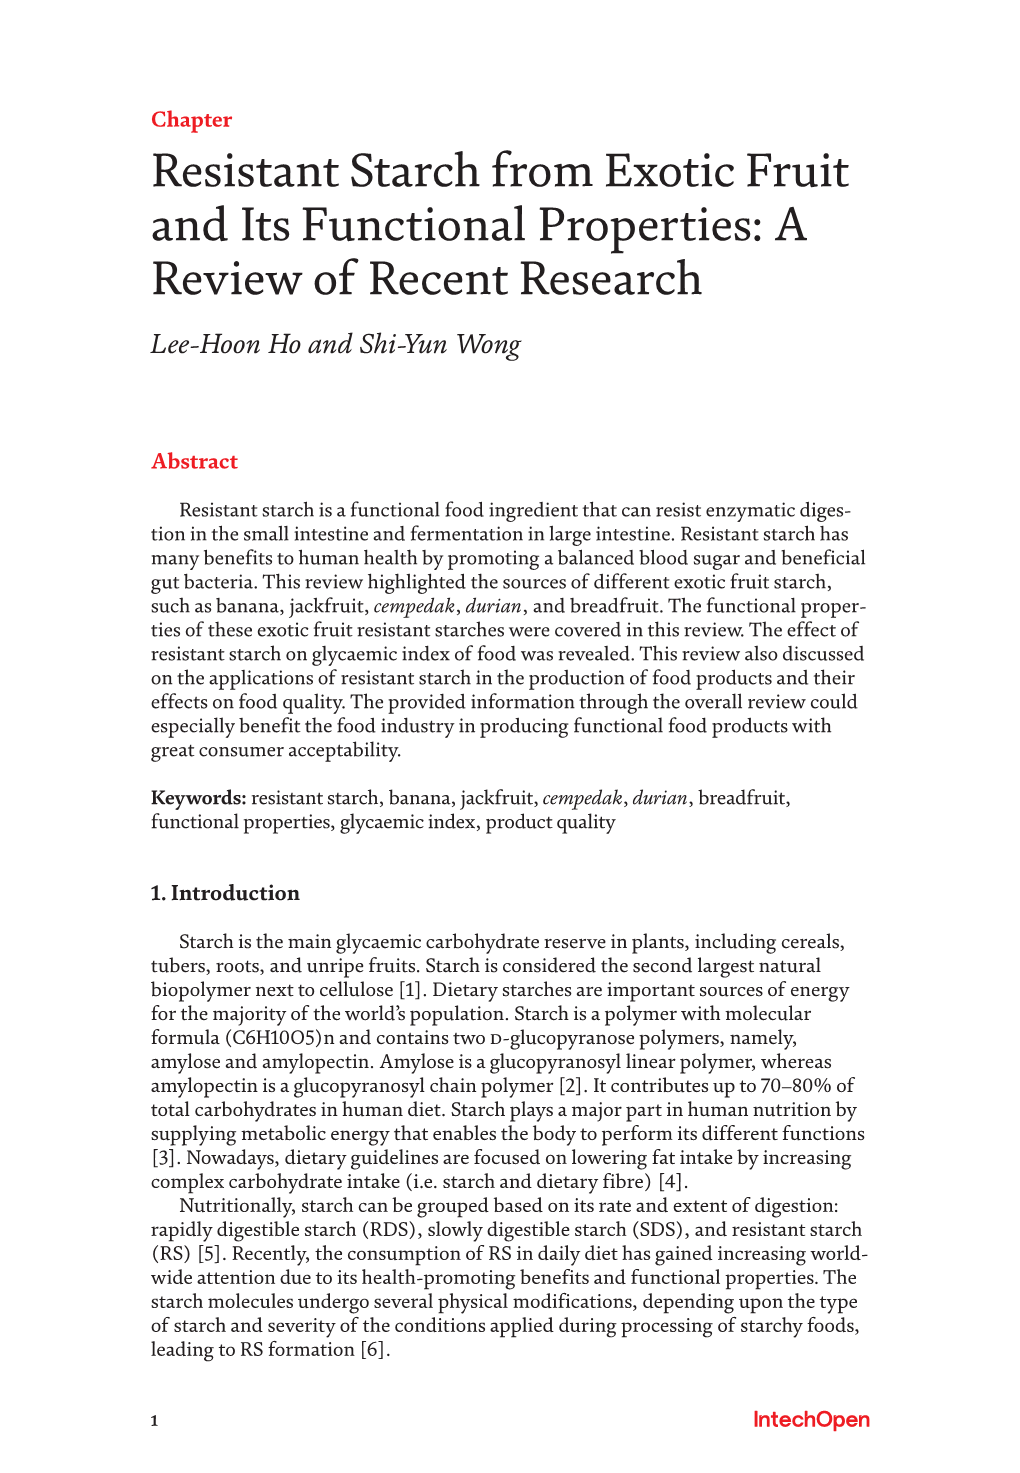 Resistant Starch from Exotic Fruit and Its Functional Properties: a Review of Recent Research Lee-Hoon Ho and Shi-Yun Wong